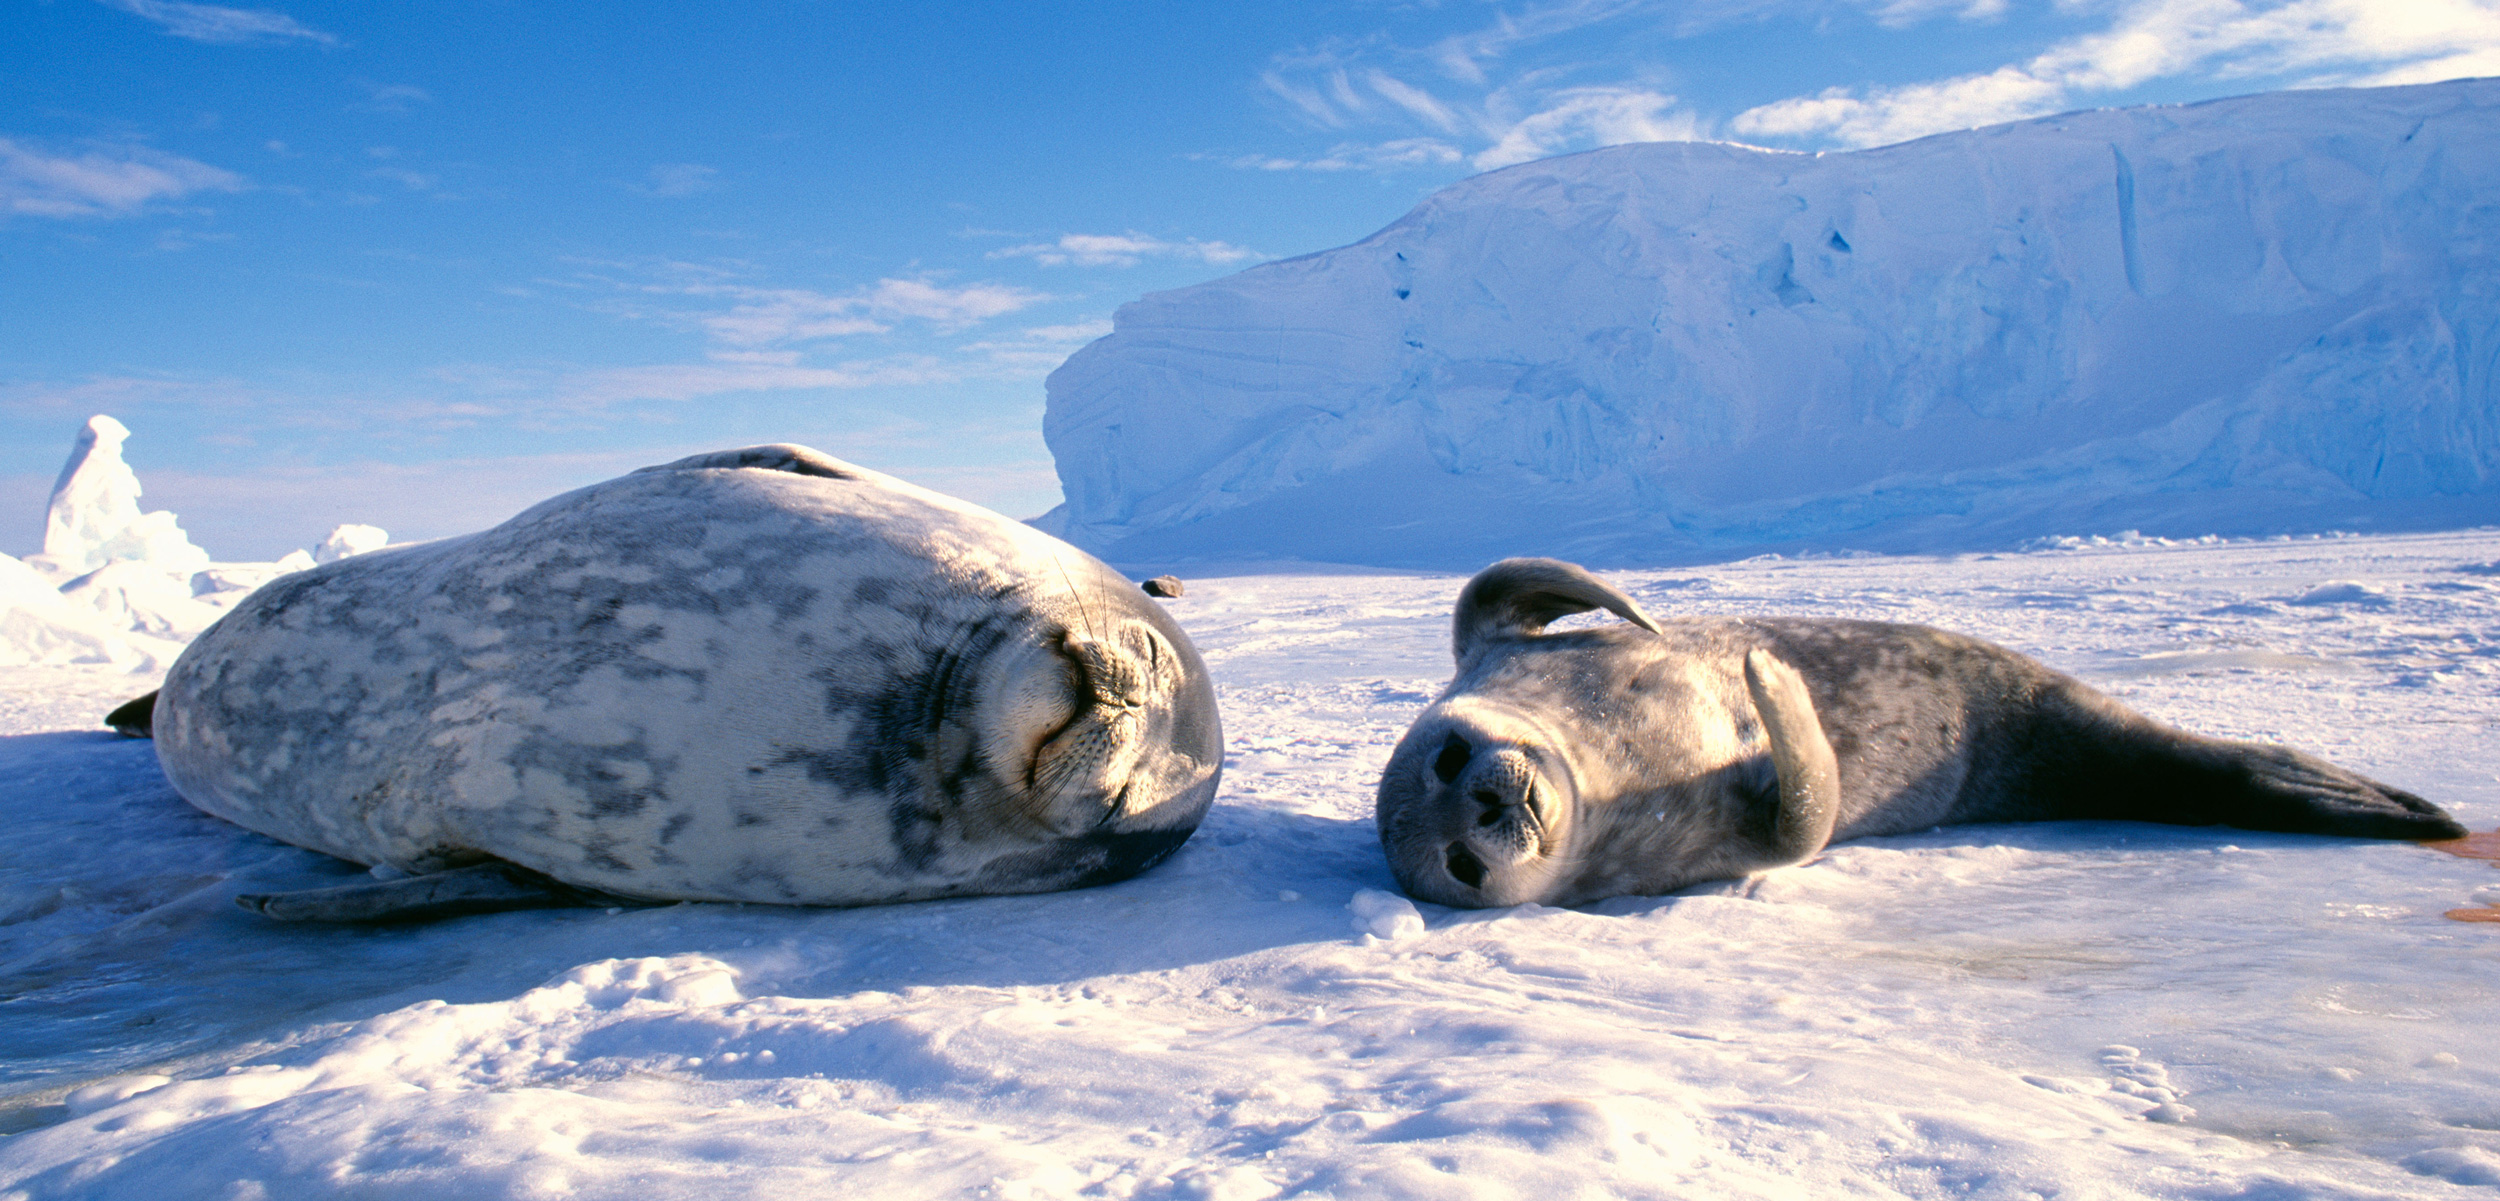 A pair of Weddell seals relax on the sea ice overlaying the Weddell Sea in Antarctica. Photo by David Tipling Photo Library/Alamy Stock Photo